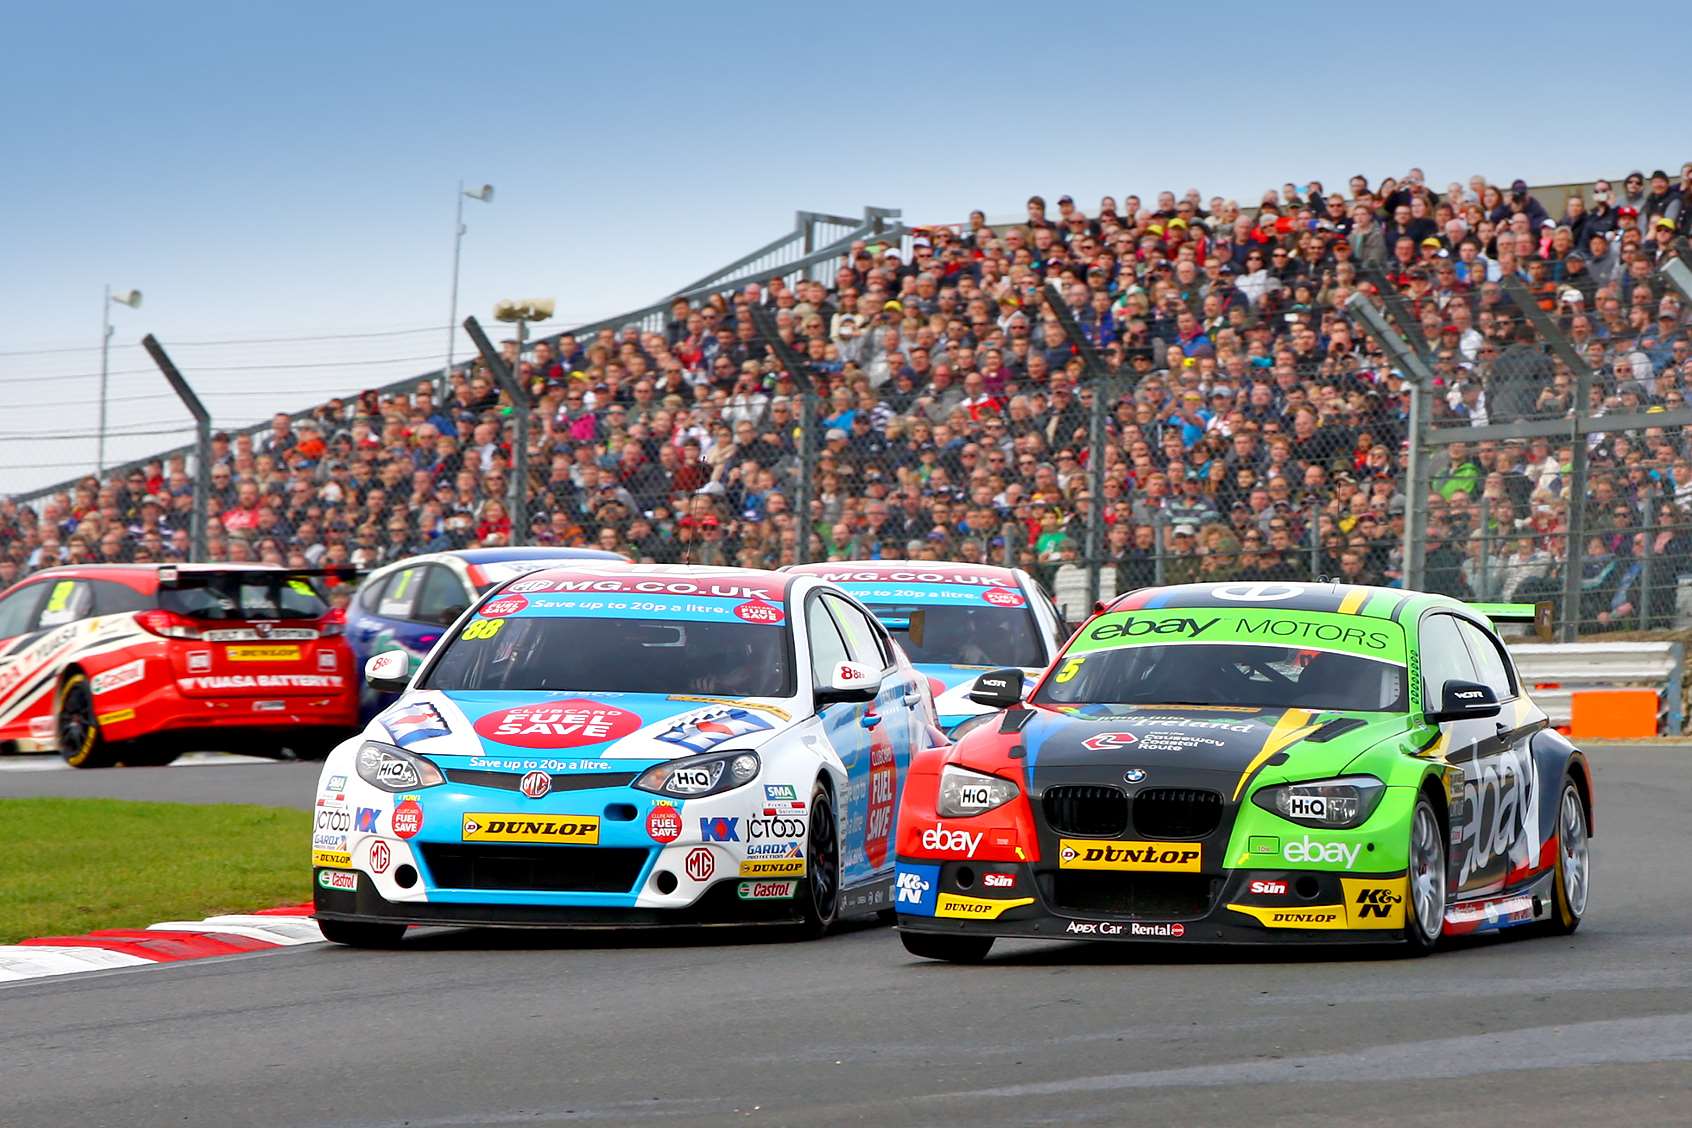 The opening three races of 2015 will take place at Brands this Sunday